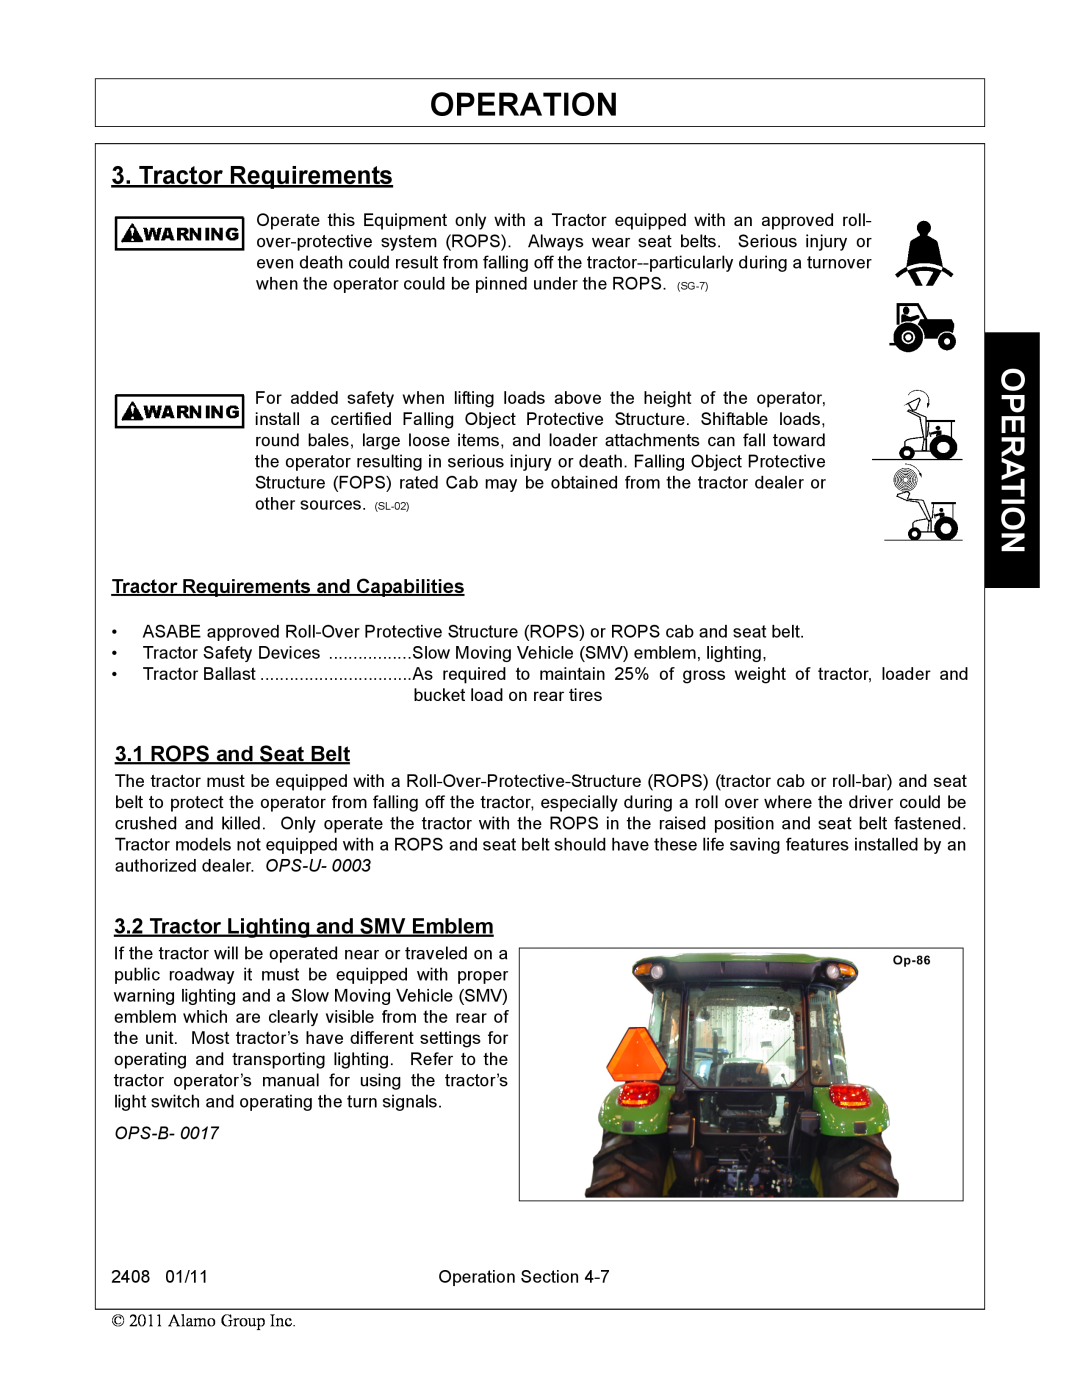 Rhino Mounts 2408 manual Operation, Tractor Requirements, ROPS and Seat Belt, Tractor Lighting and SMV Emblem, Ops-B 